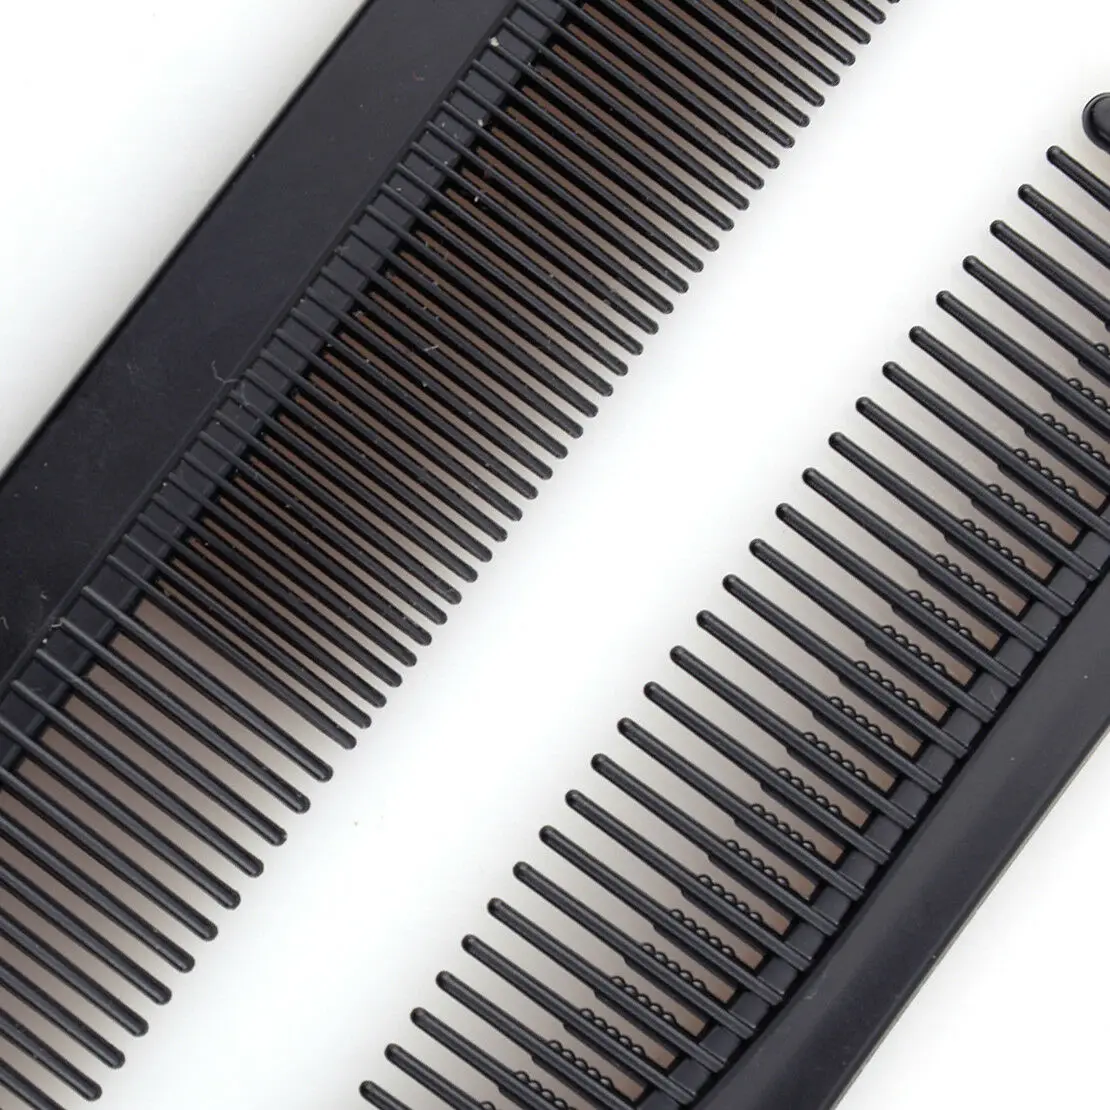 
High Quality Salon Barber Hairdressing 10 pcs Massage Variety Gears Assorted Pack Plastic Hair Comb Set 